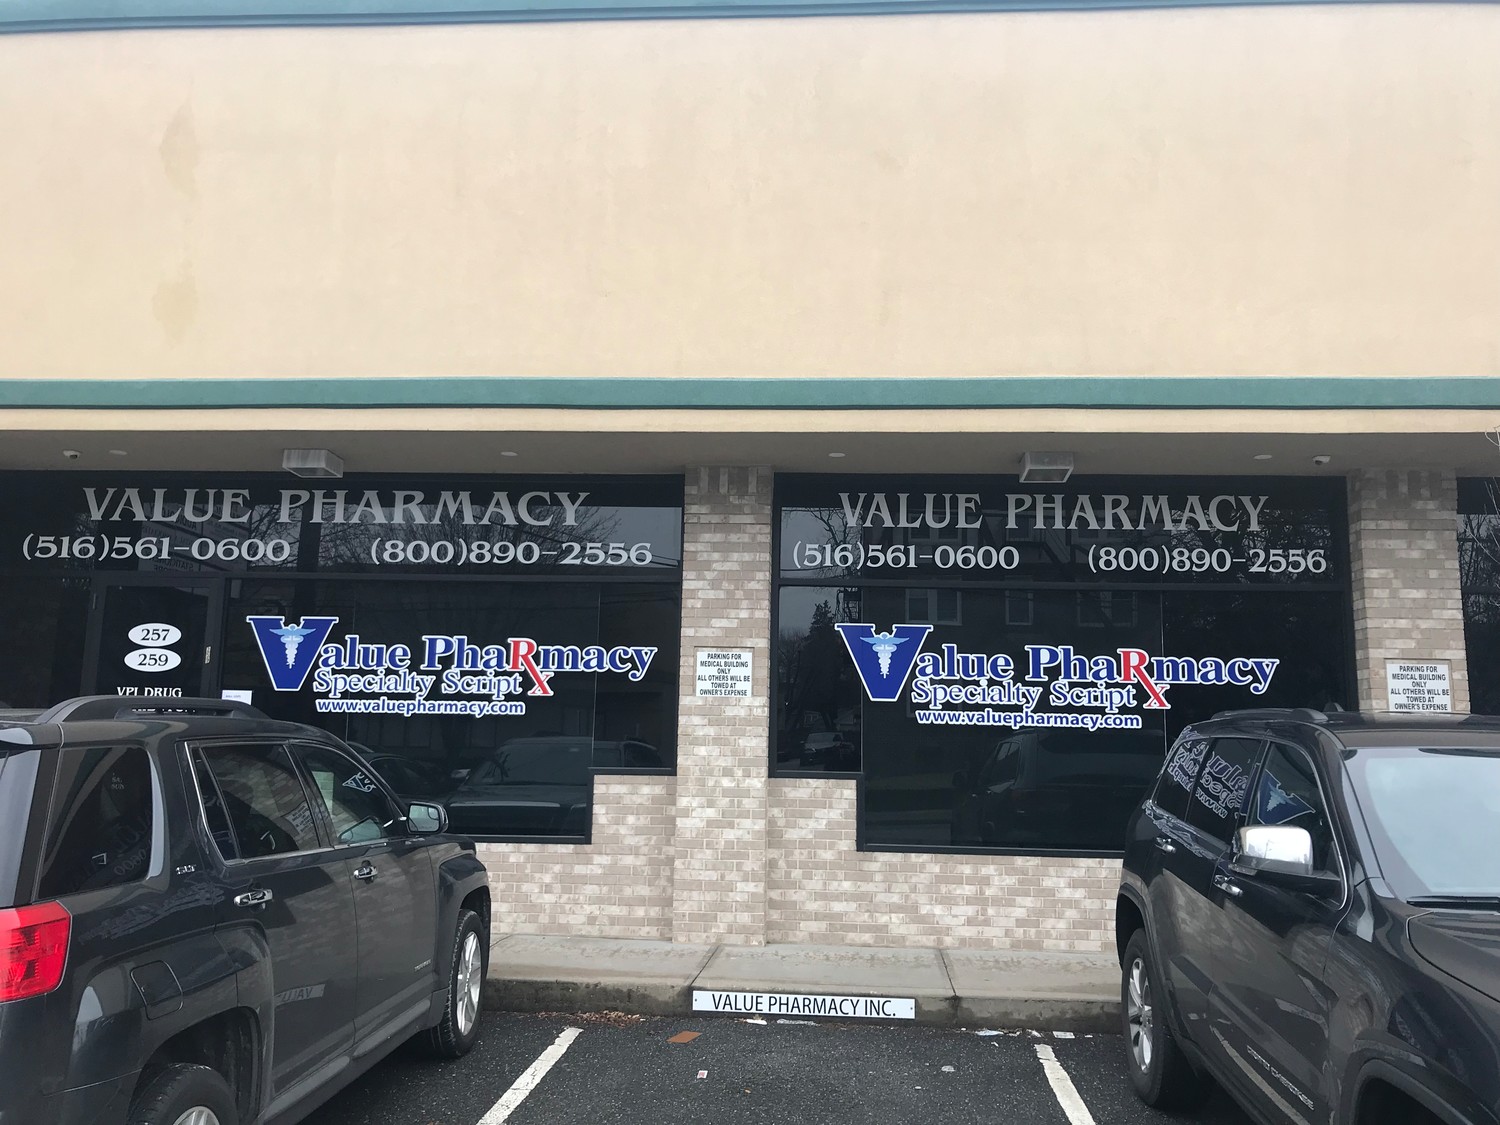 The co-owner of Value Pharmacy in Lynbrook was arrested in connection with allegedly defrauding the state Medicaid program of more than $8 million.